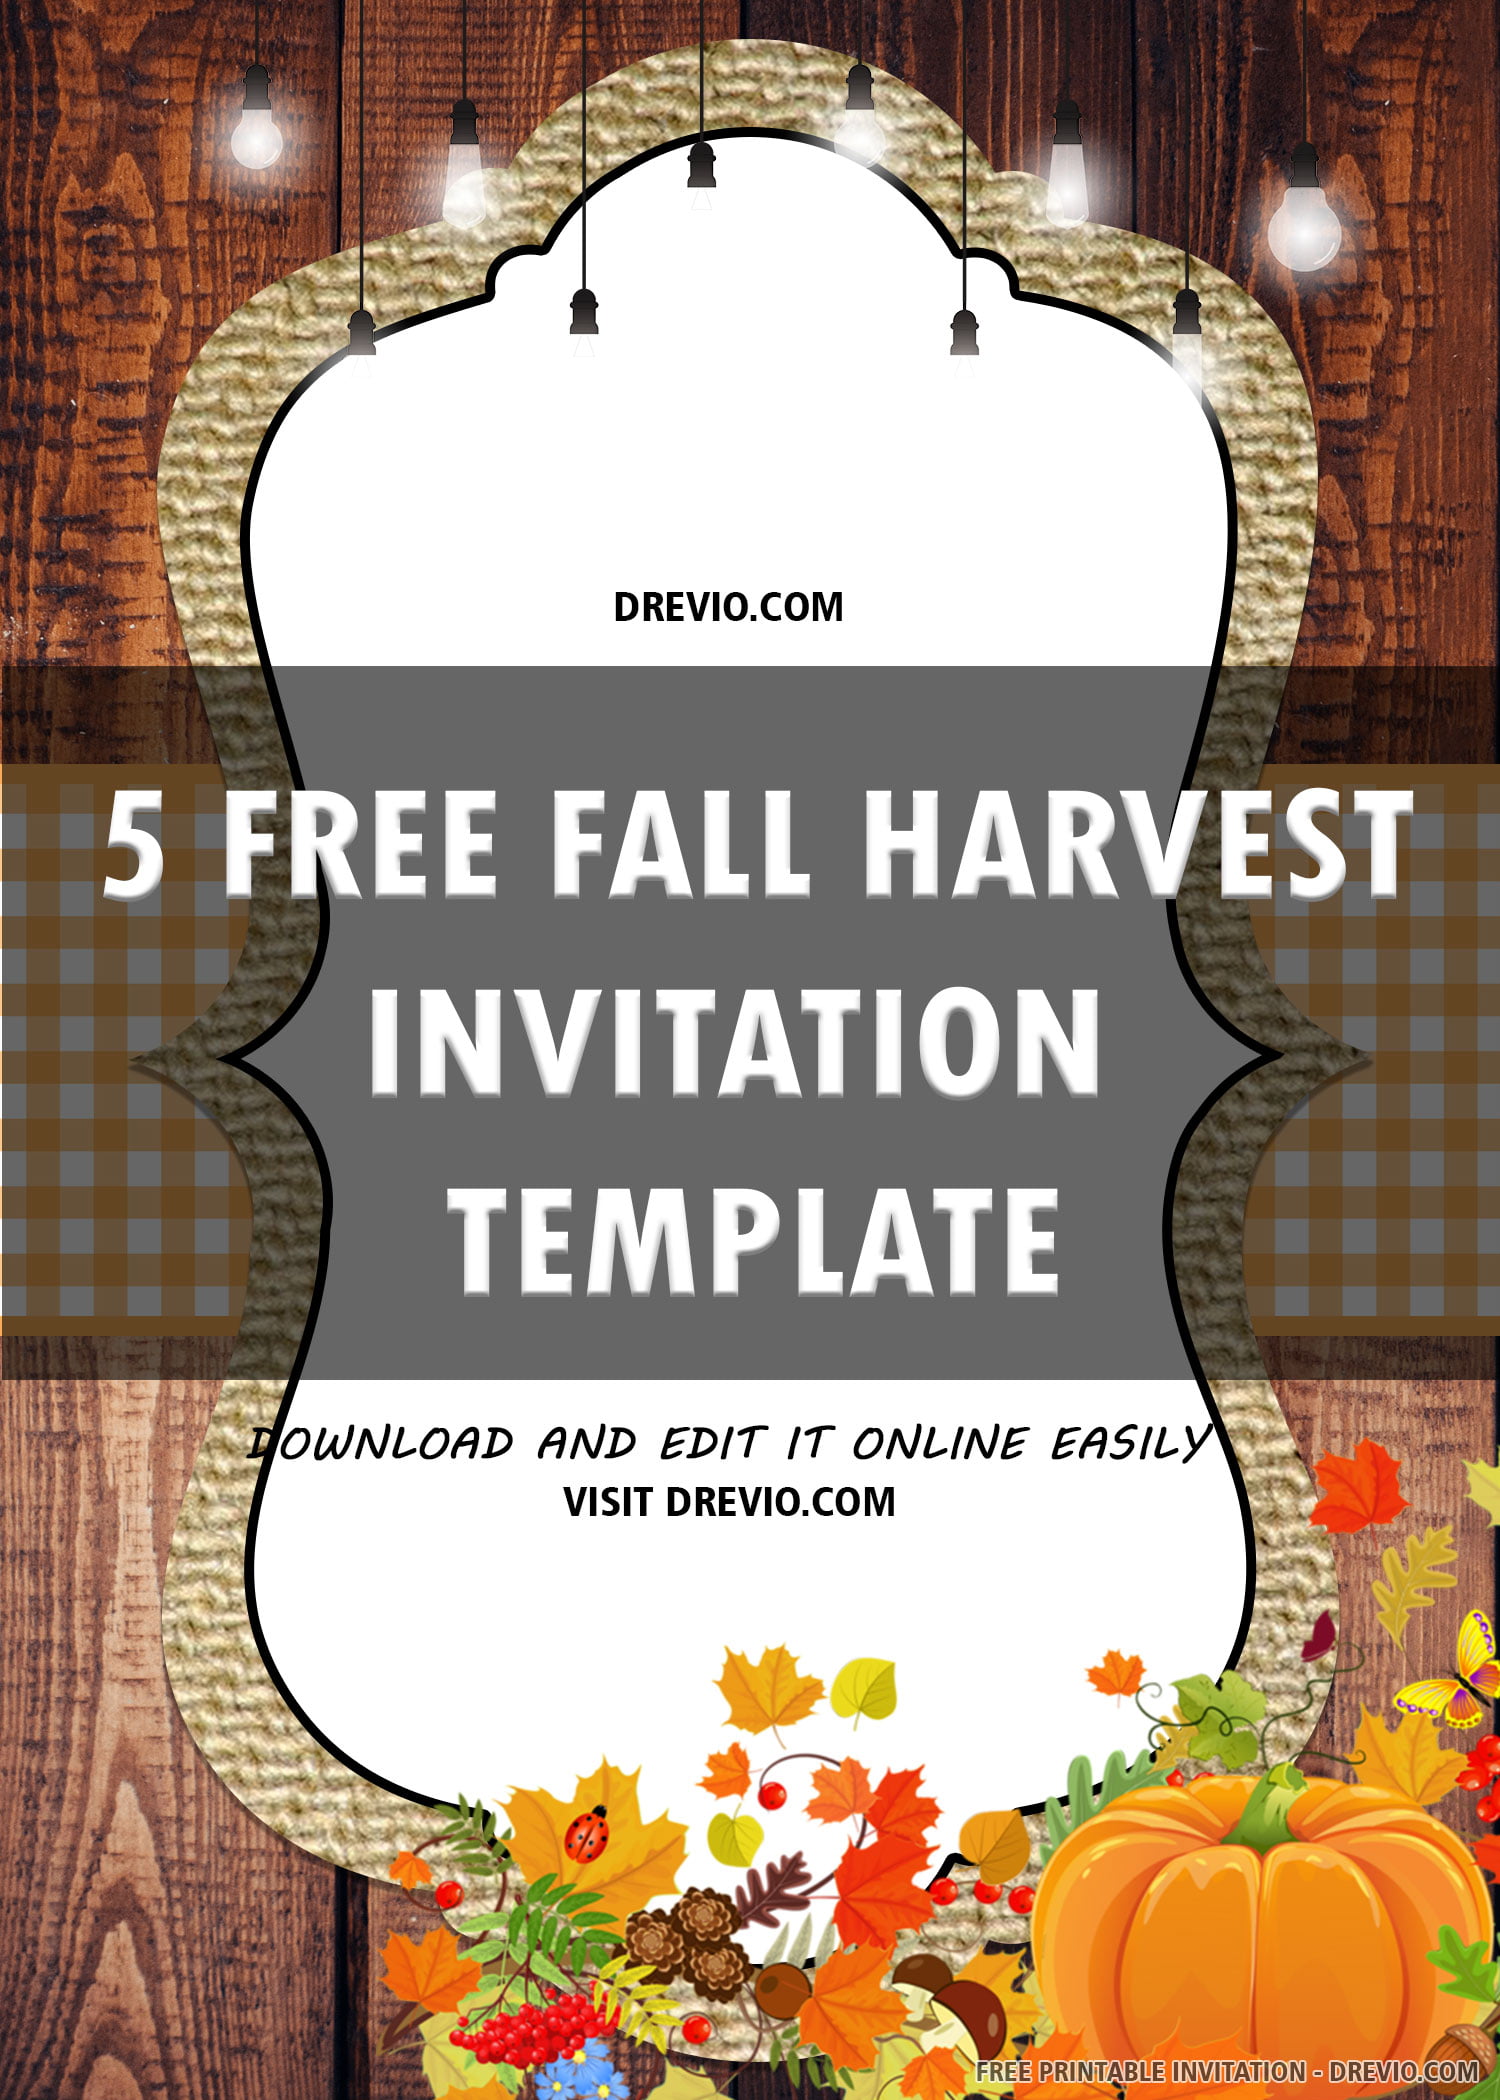  FREE PRINTABLE Fall Harvest Festival For Birthday Invitation Template Download Hundreds FREE